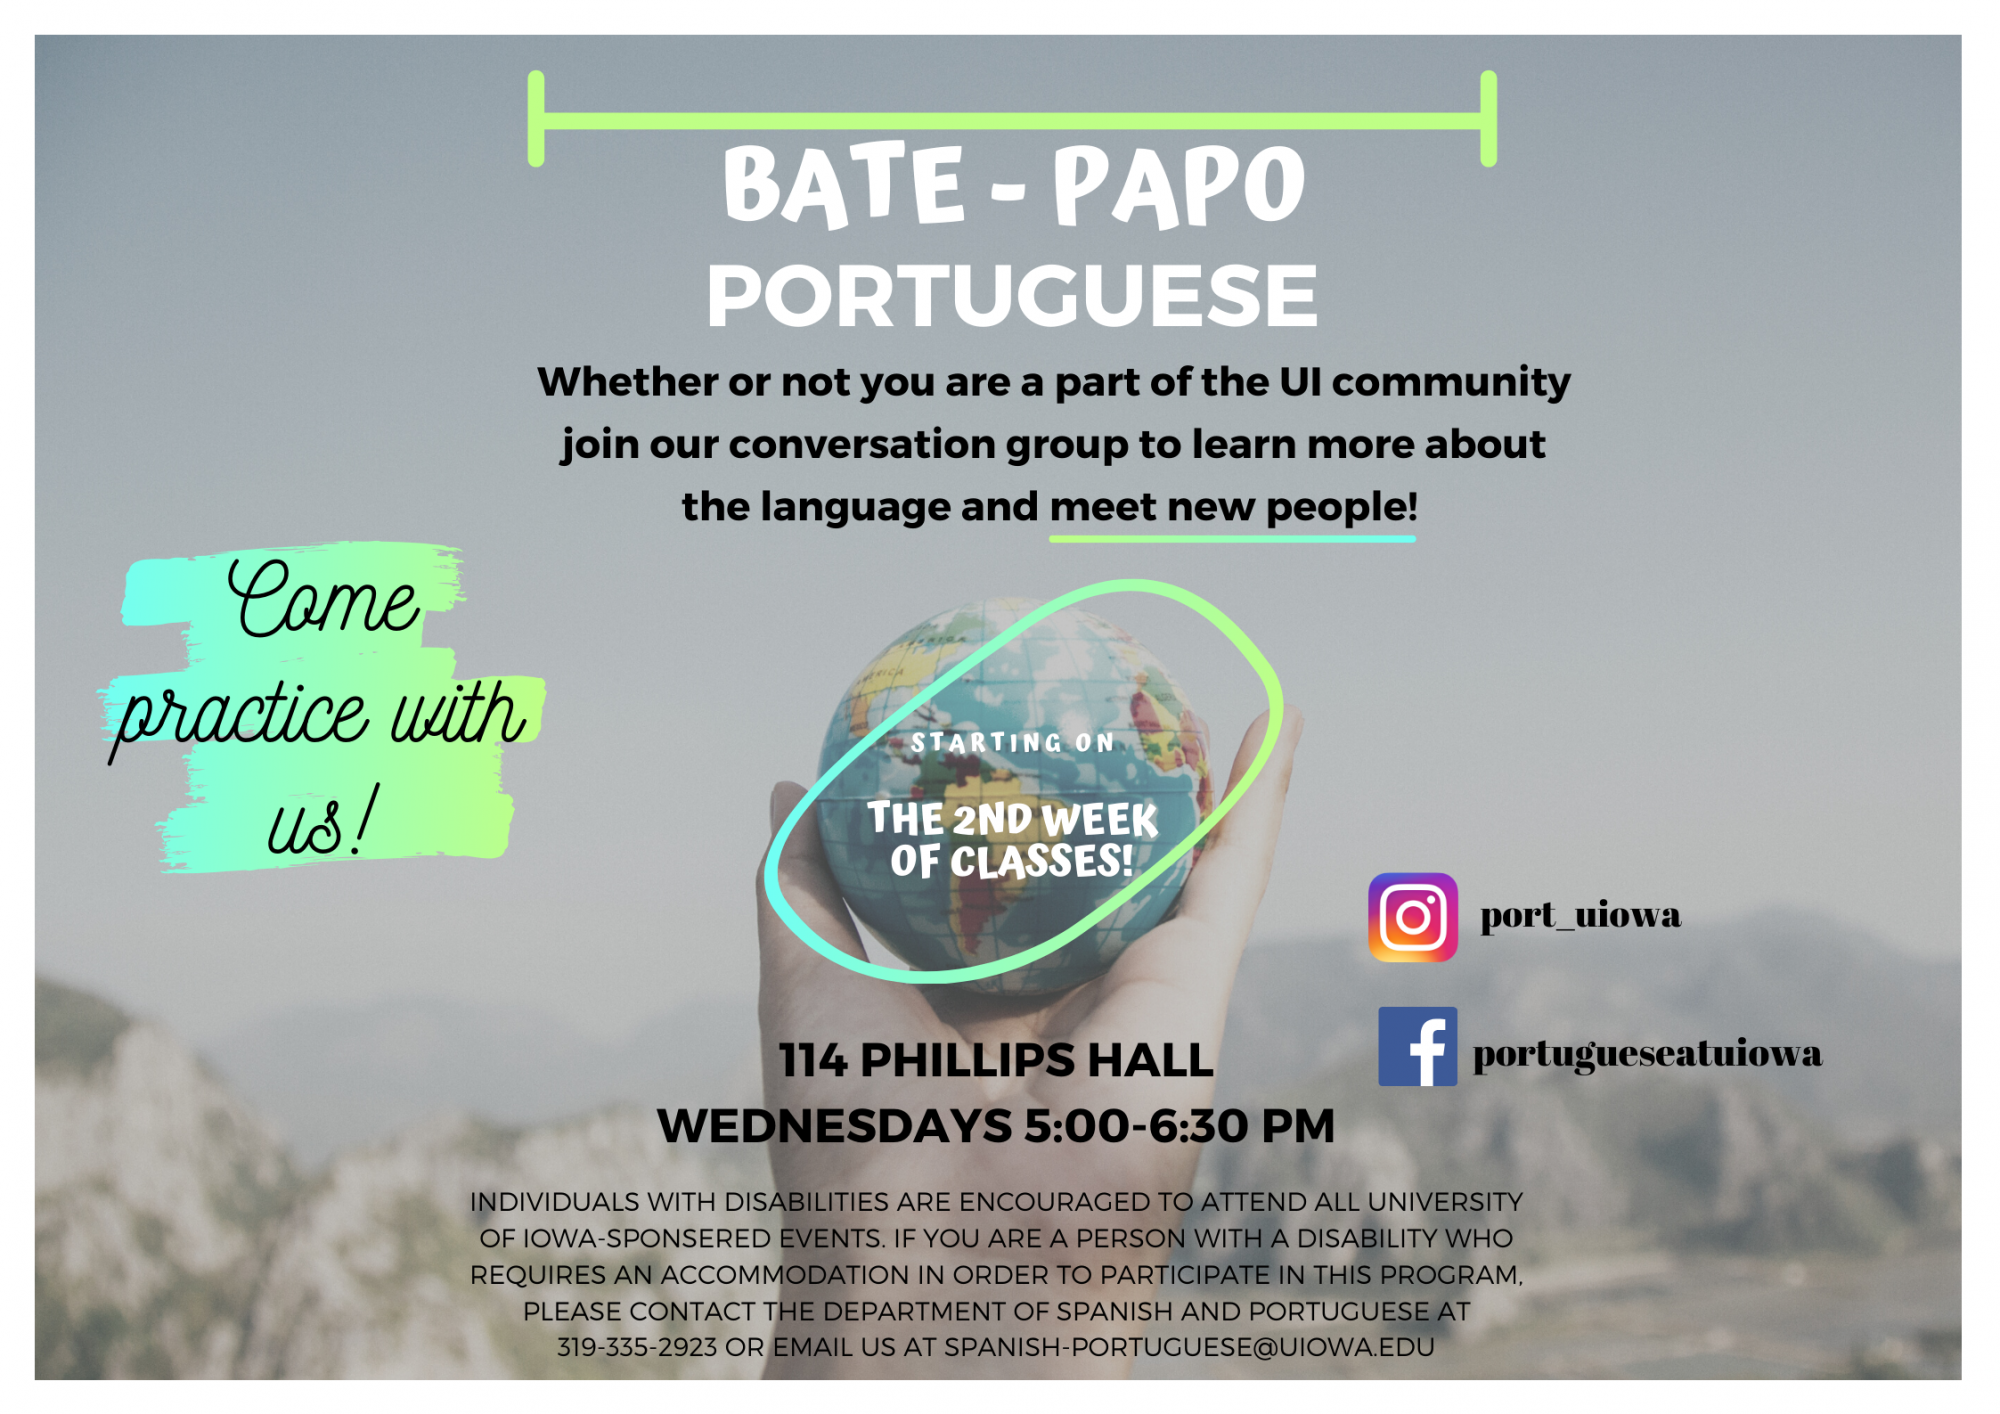 Bate-papo portuguese whether or not you are a part of the university join our conversation group to learn more about the language and meet new people 114 phillips hall wednesdays 5-6:30 pm